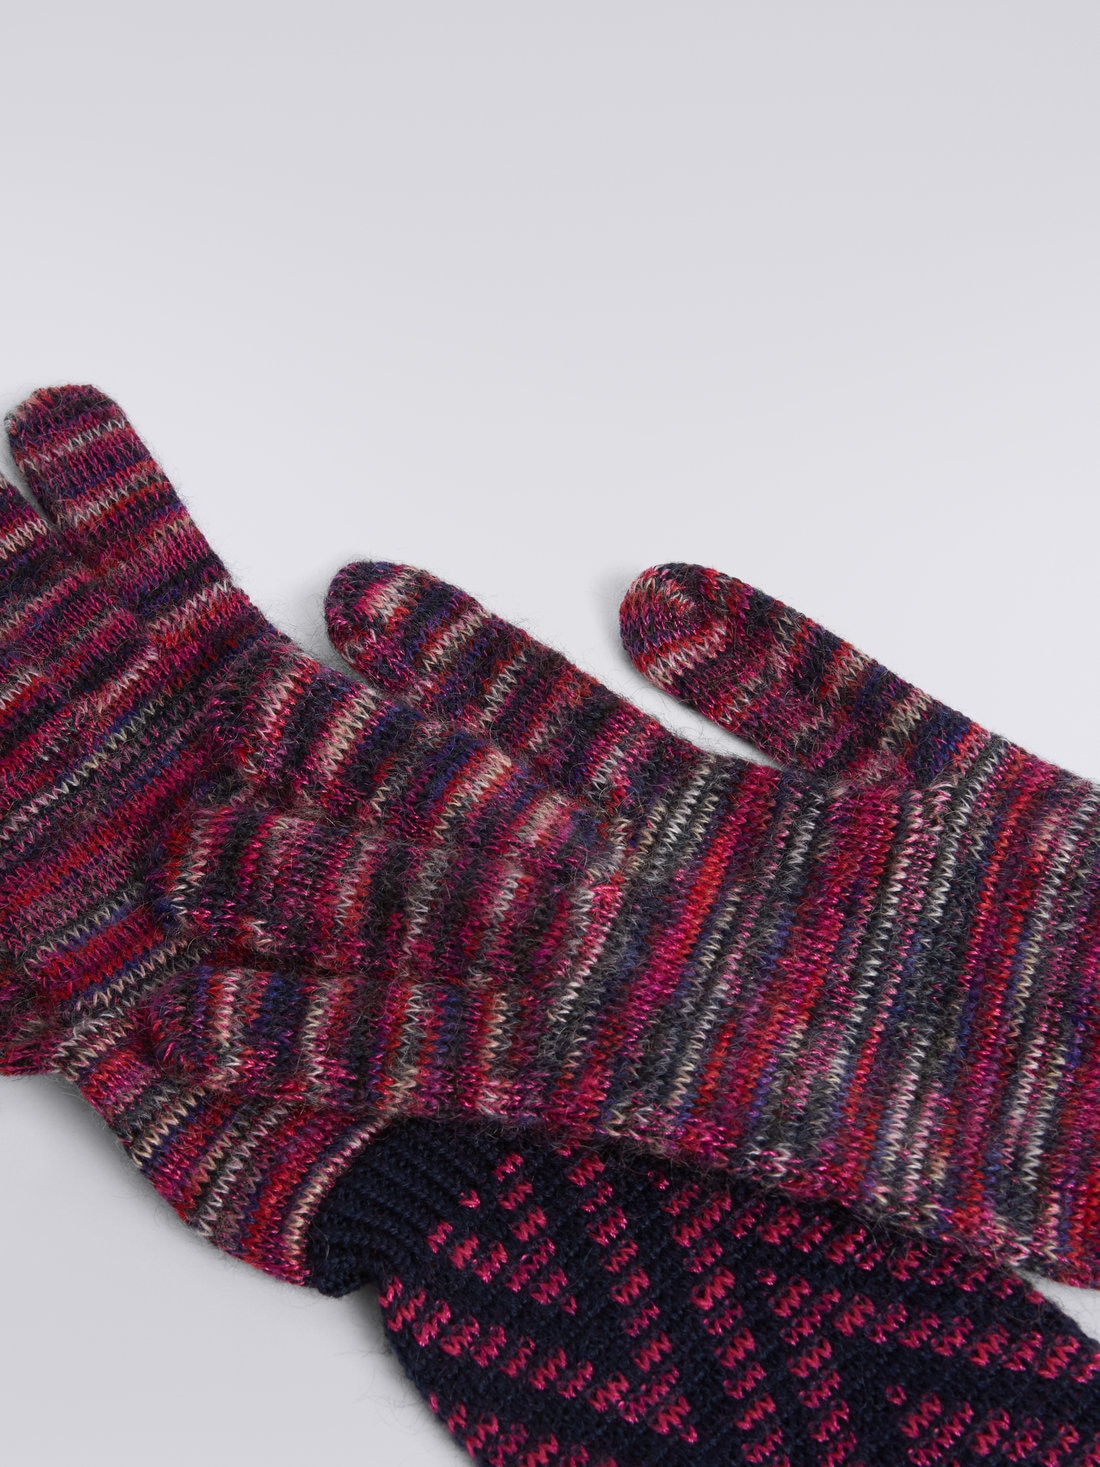 Multi-worked wool and mohair knit gloves, Multicoloured  - 8053147024271 - 1